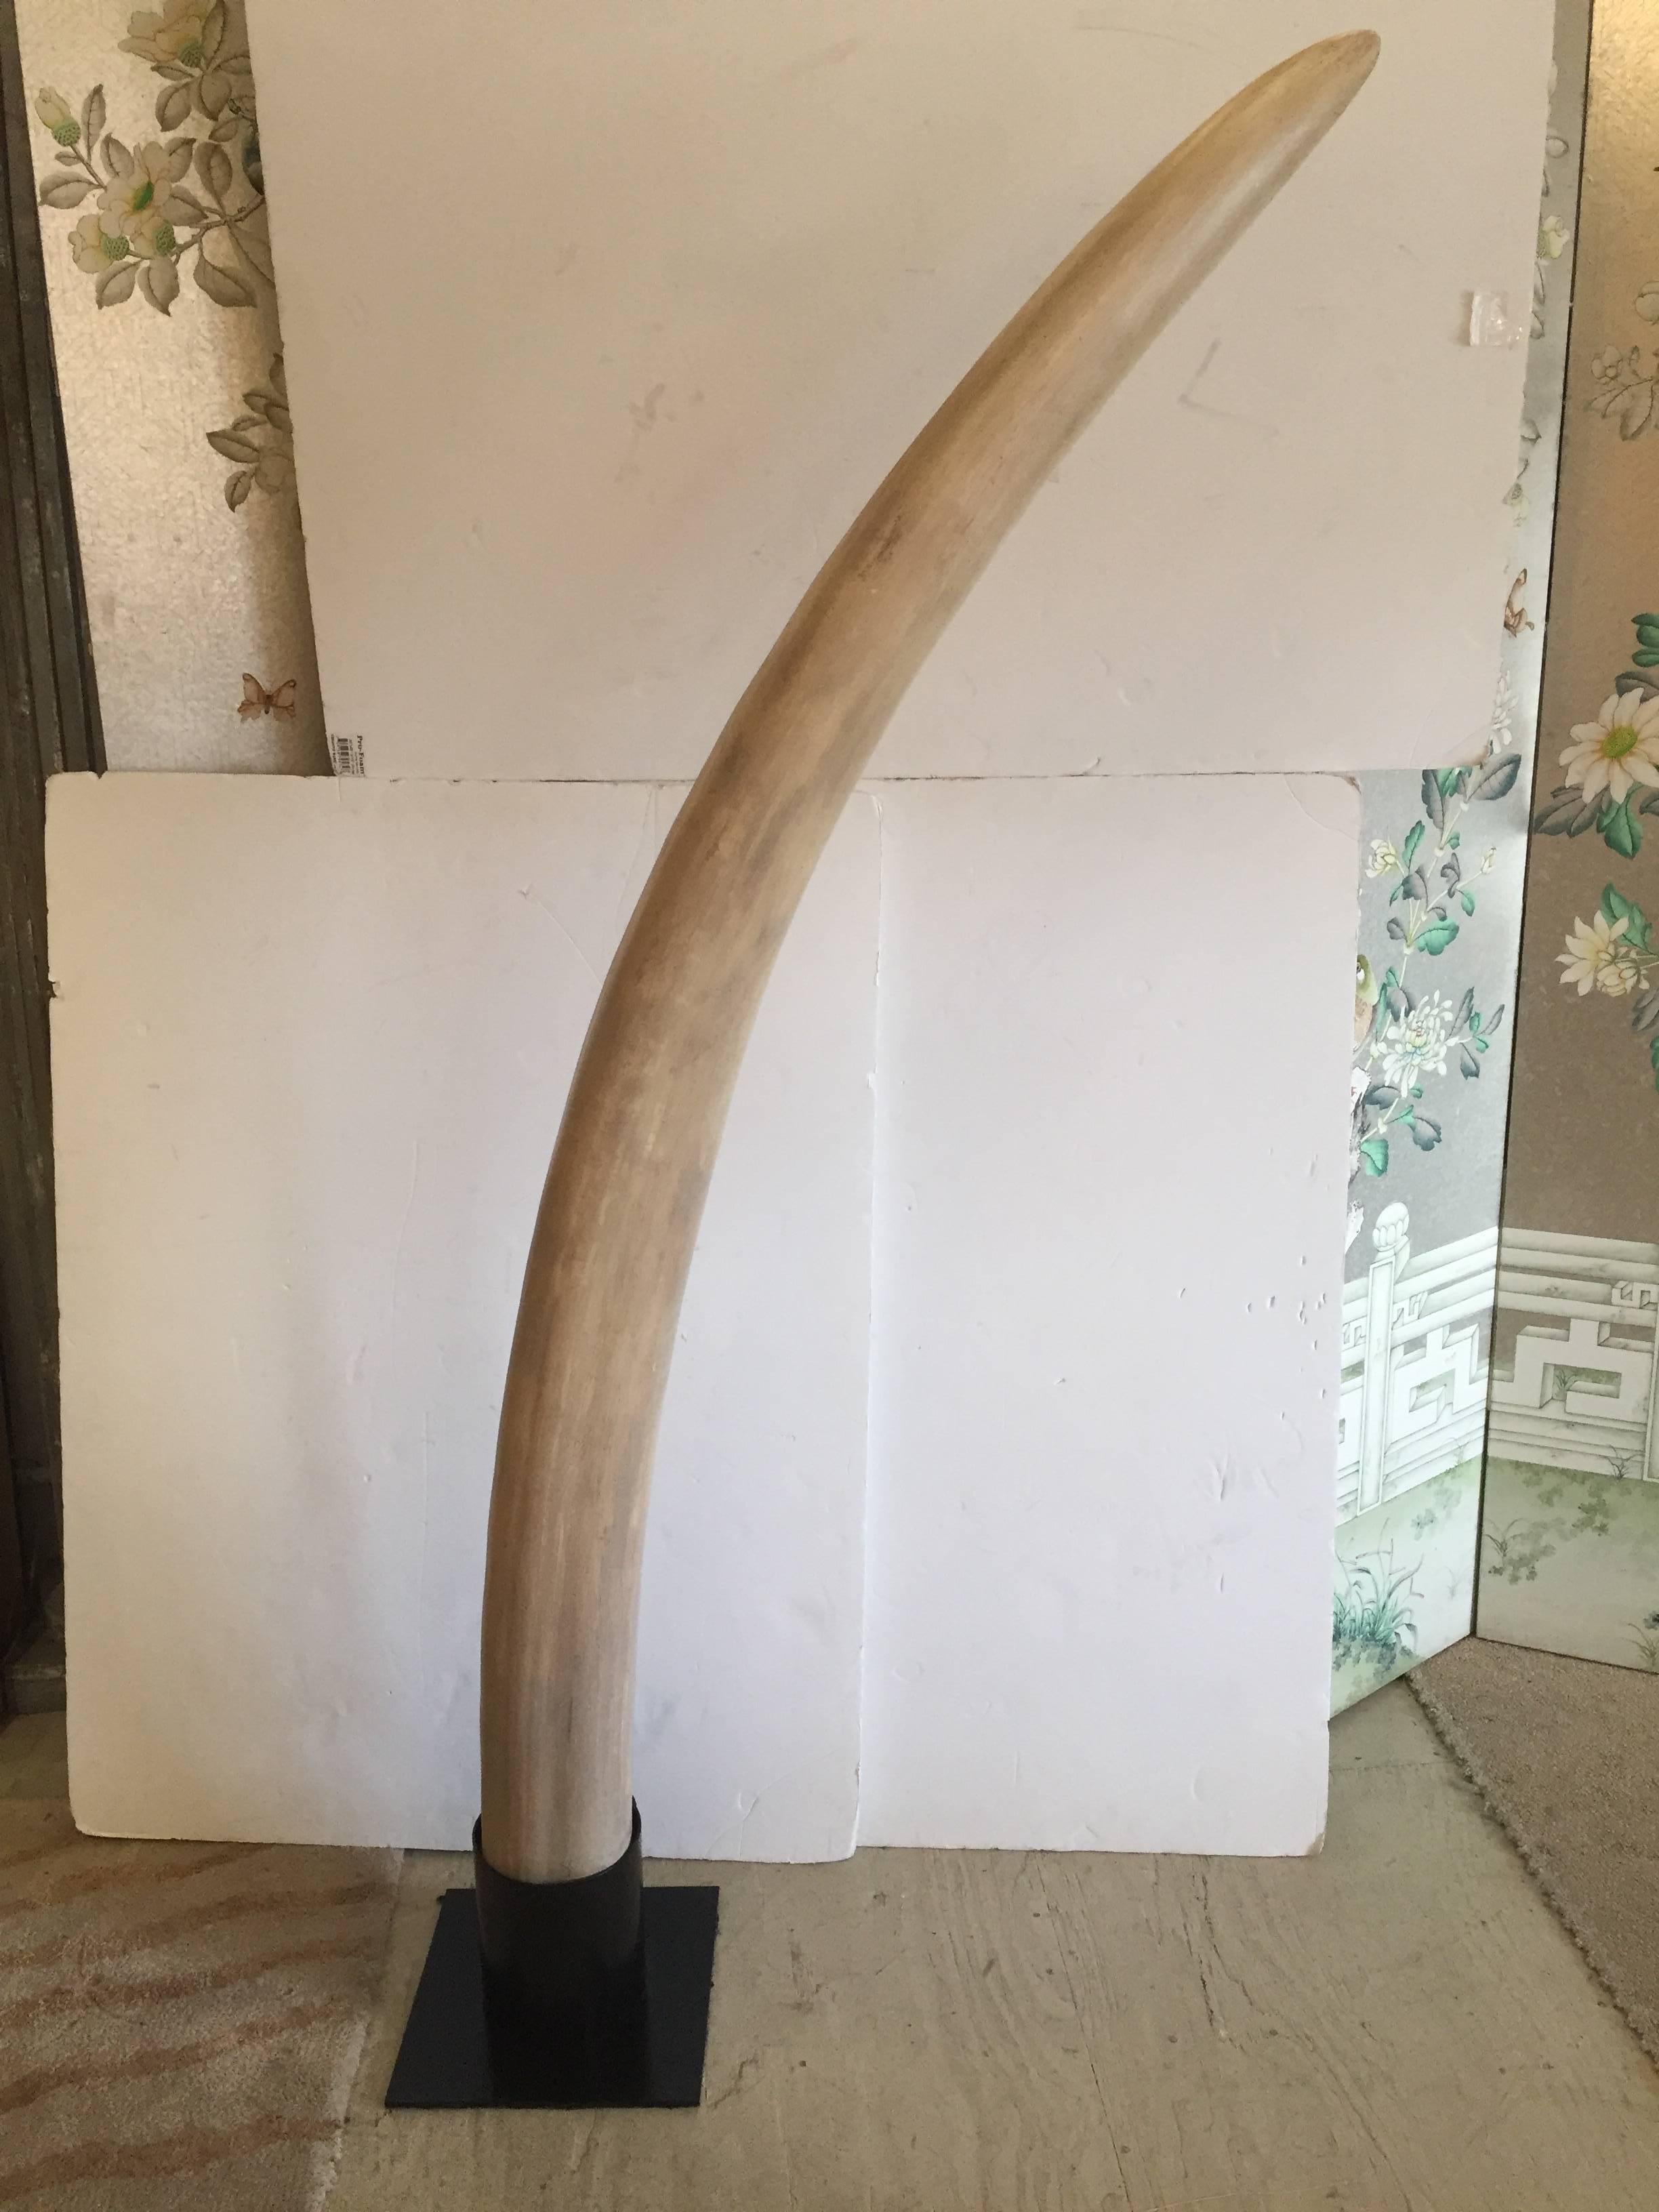 Unbelievably theatrical pair of very tall faux elephant tusks with fabulous custom black iron bases. Base 12” x 12”
Height 70” floor to tip of tusk.